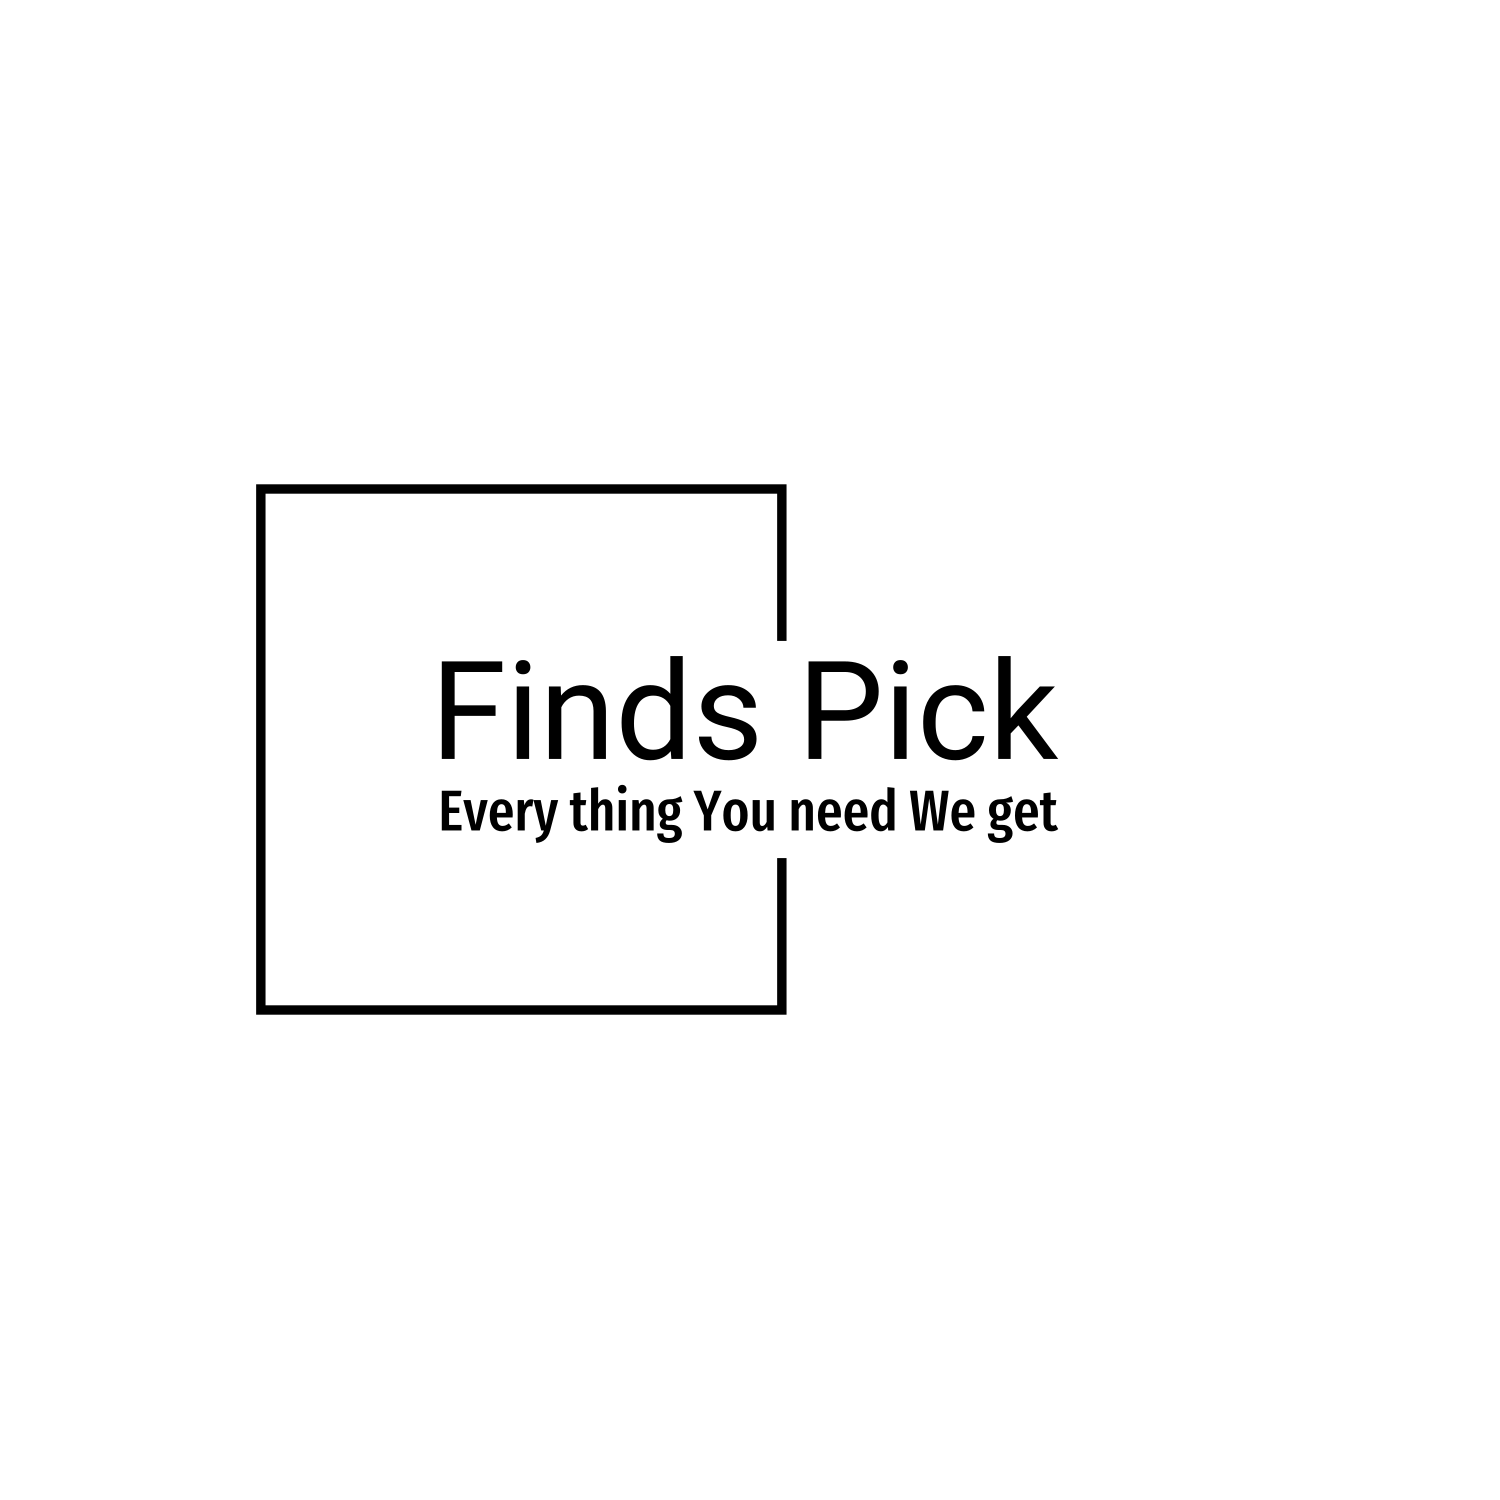 Finds Pick - Everything You need We get